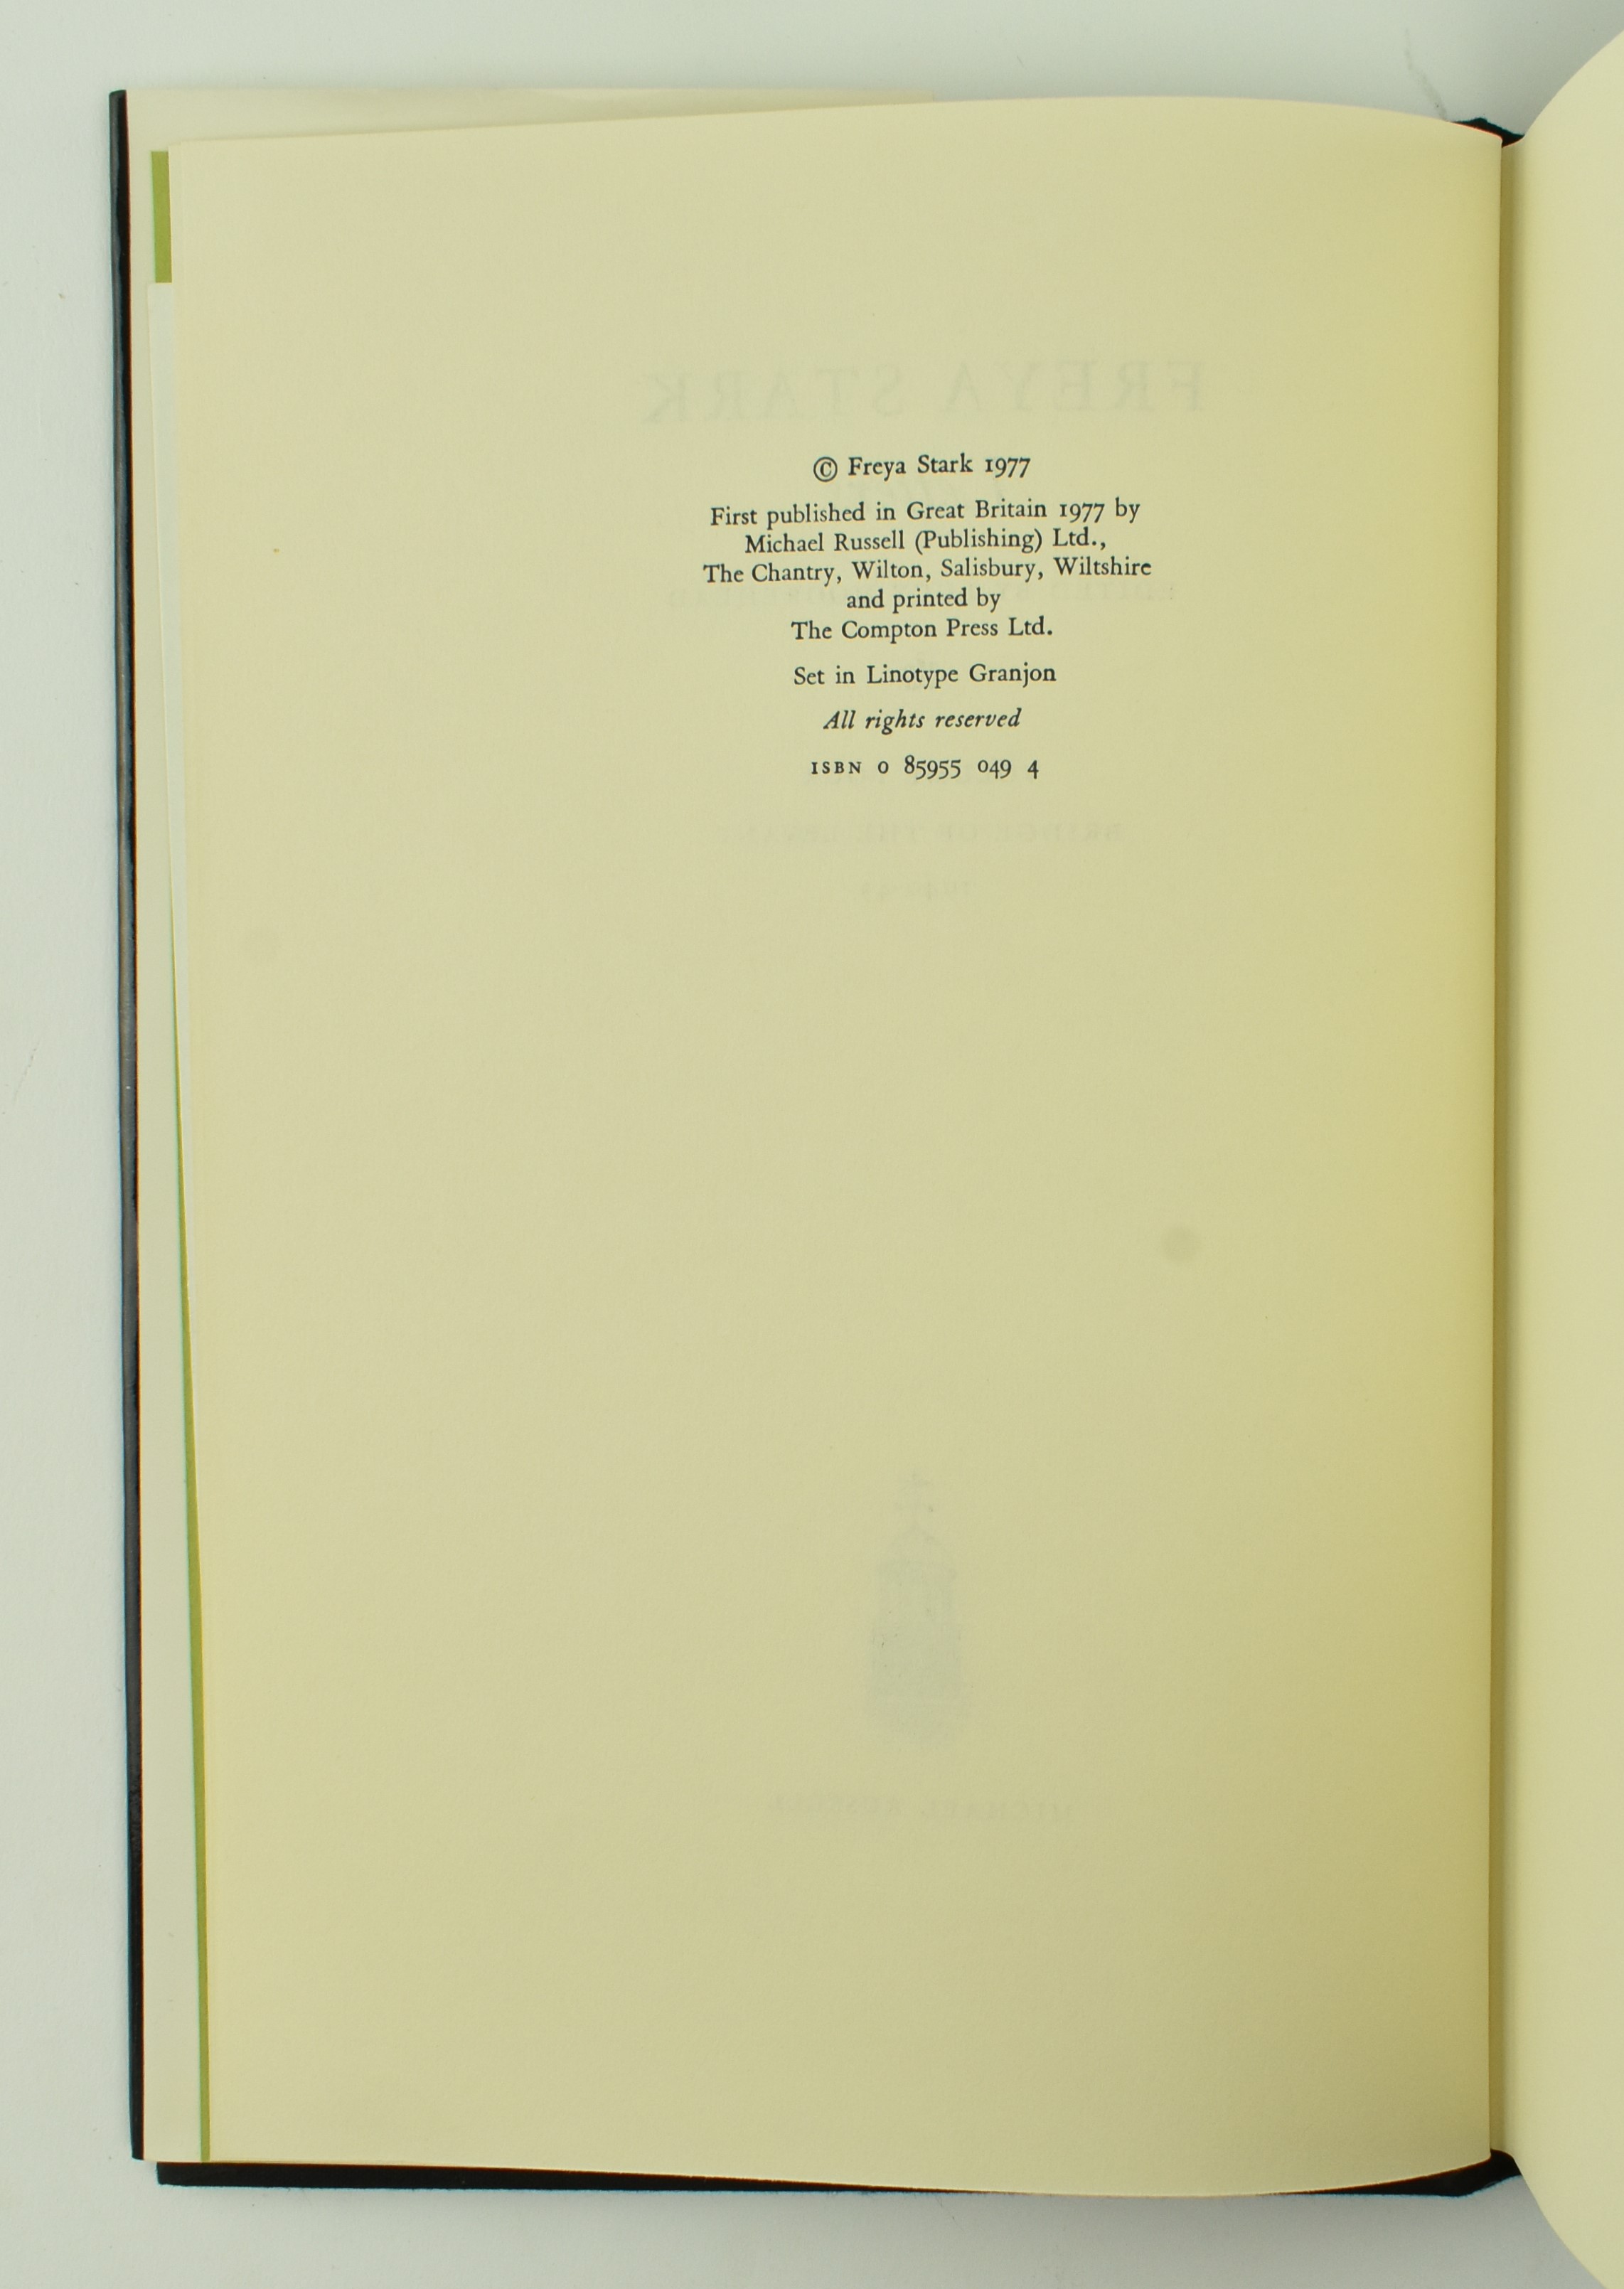 MODERN FIRST EDITIONS. COLLCECTION OF POETRY & NON-FICTION - Image 6 of 14